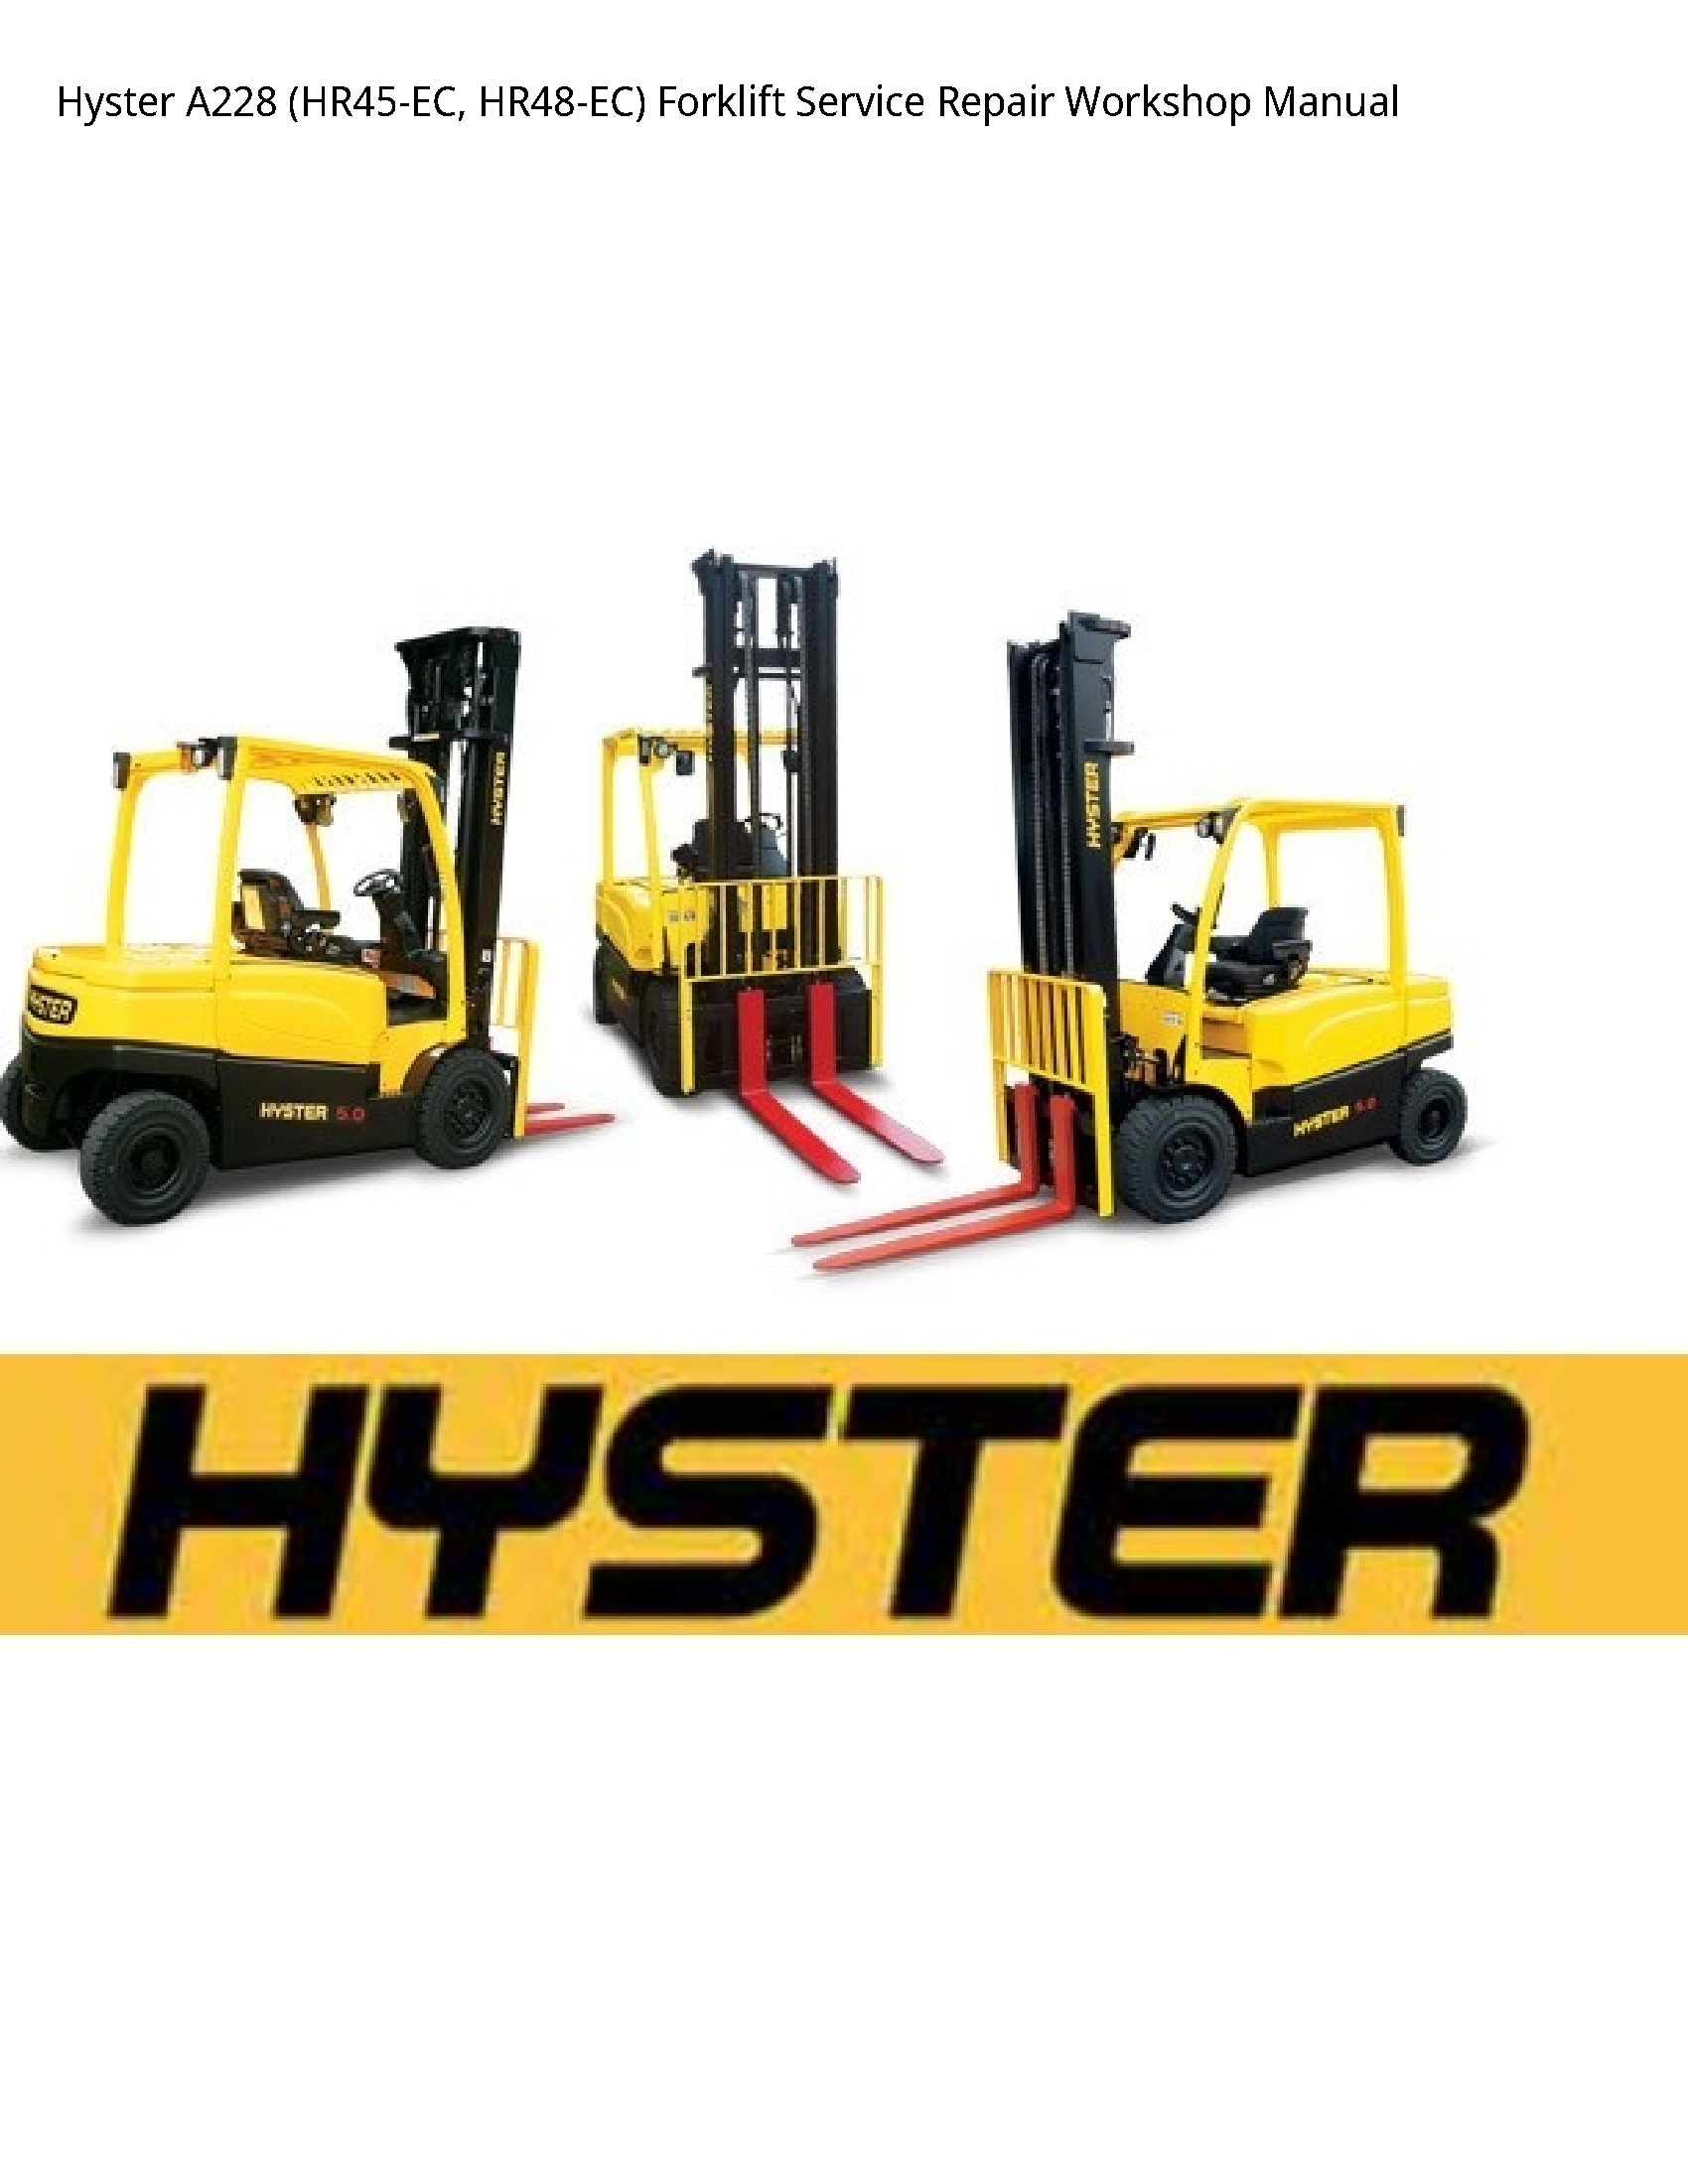 Hyster A228 Forklift manual